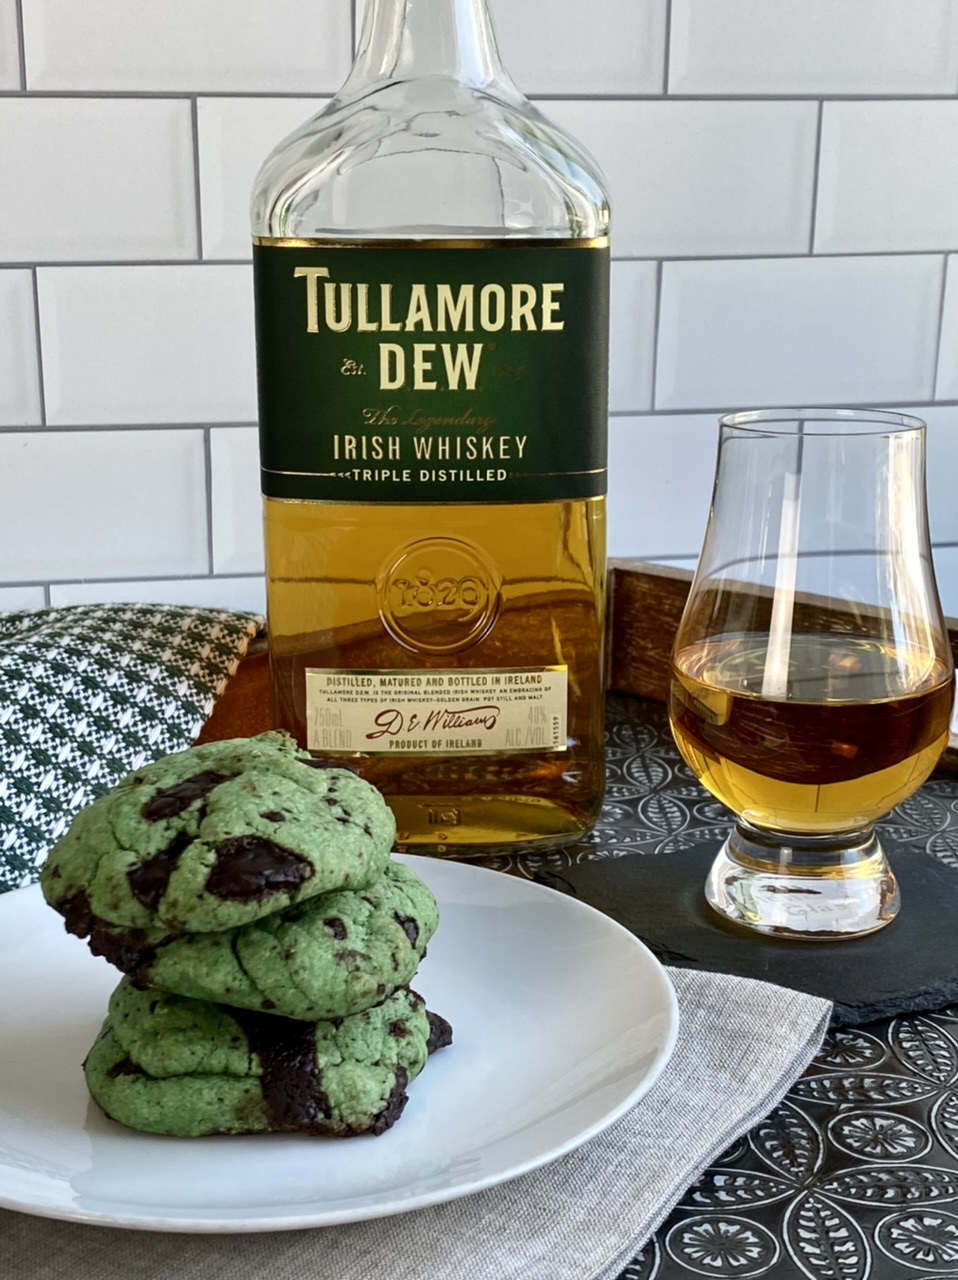 Irish whiskey and chocolate chip cookies on a white plate with tullamore dew whiskey